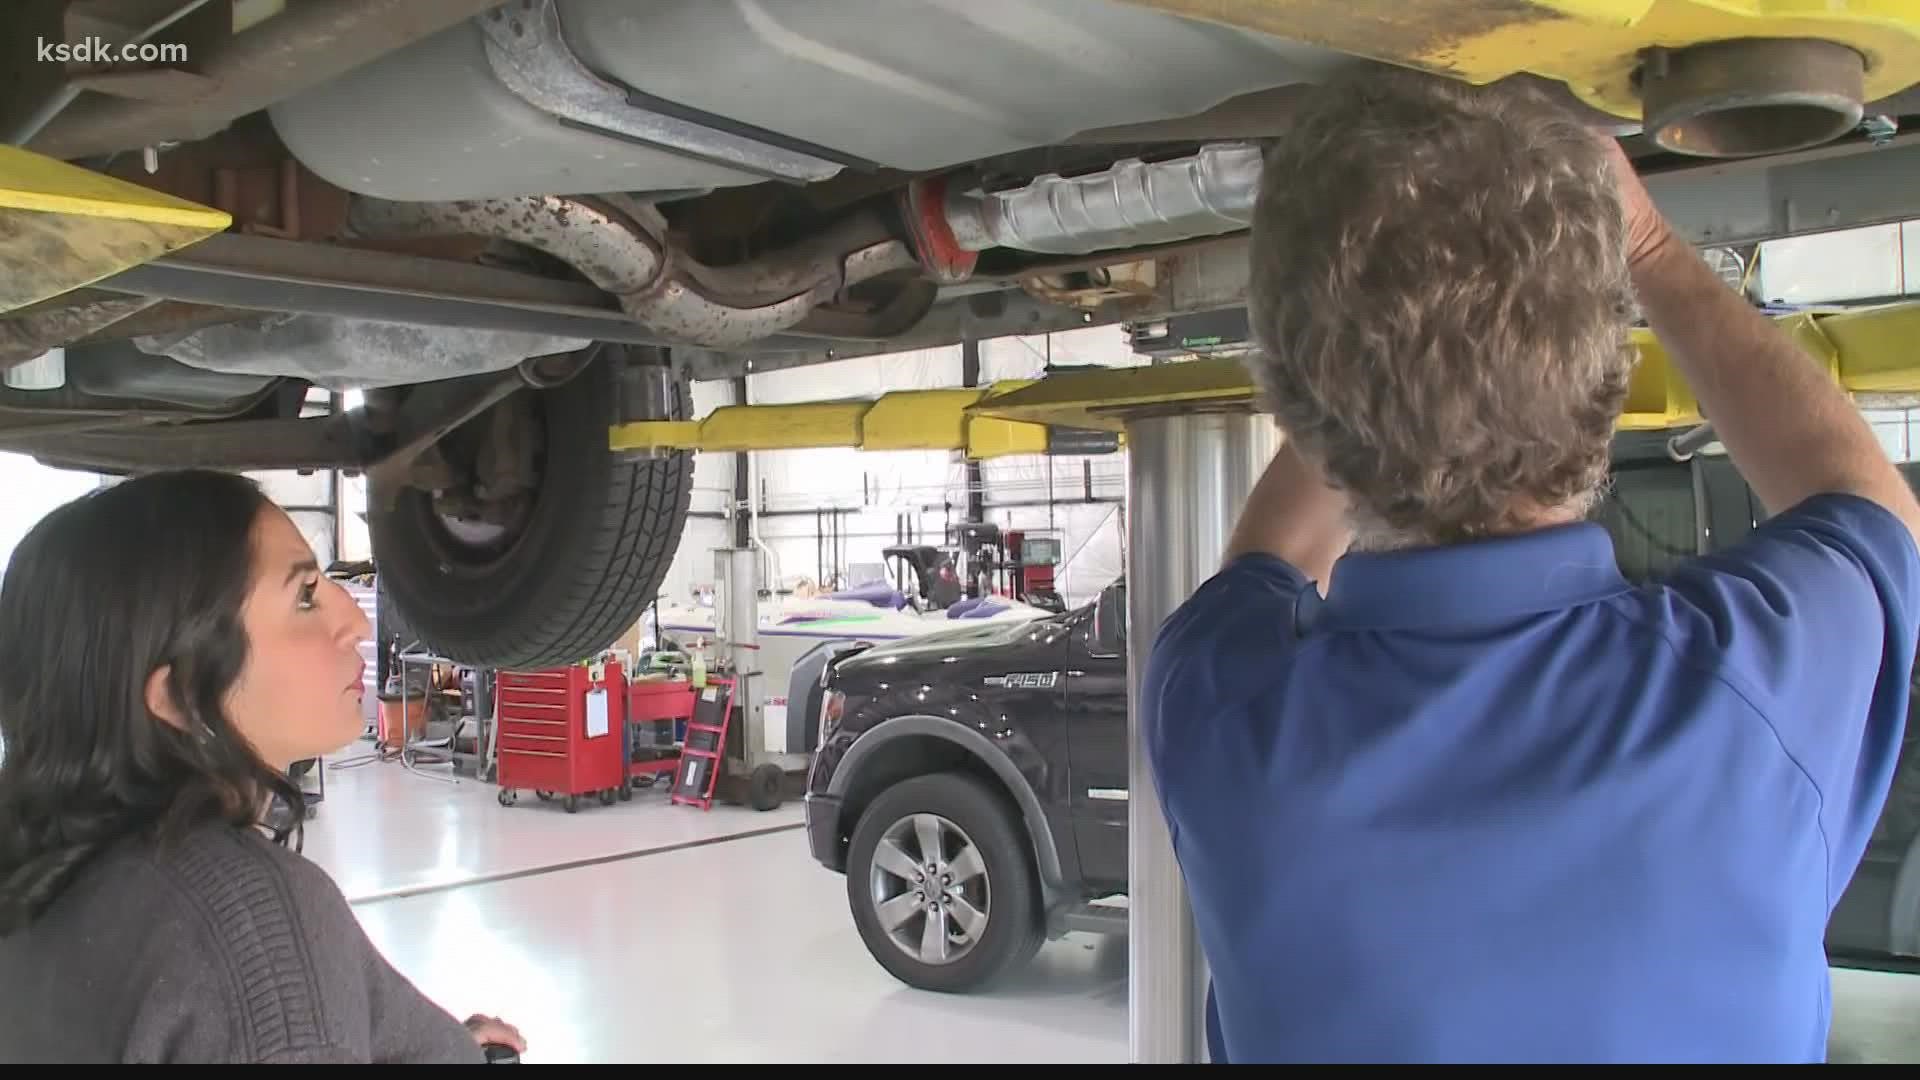 Car thefts, break-ins and catalytic converter thefts are on the rise in the St. Louis area